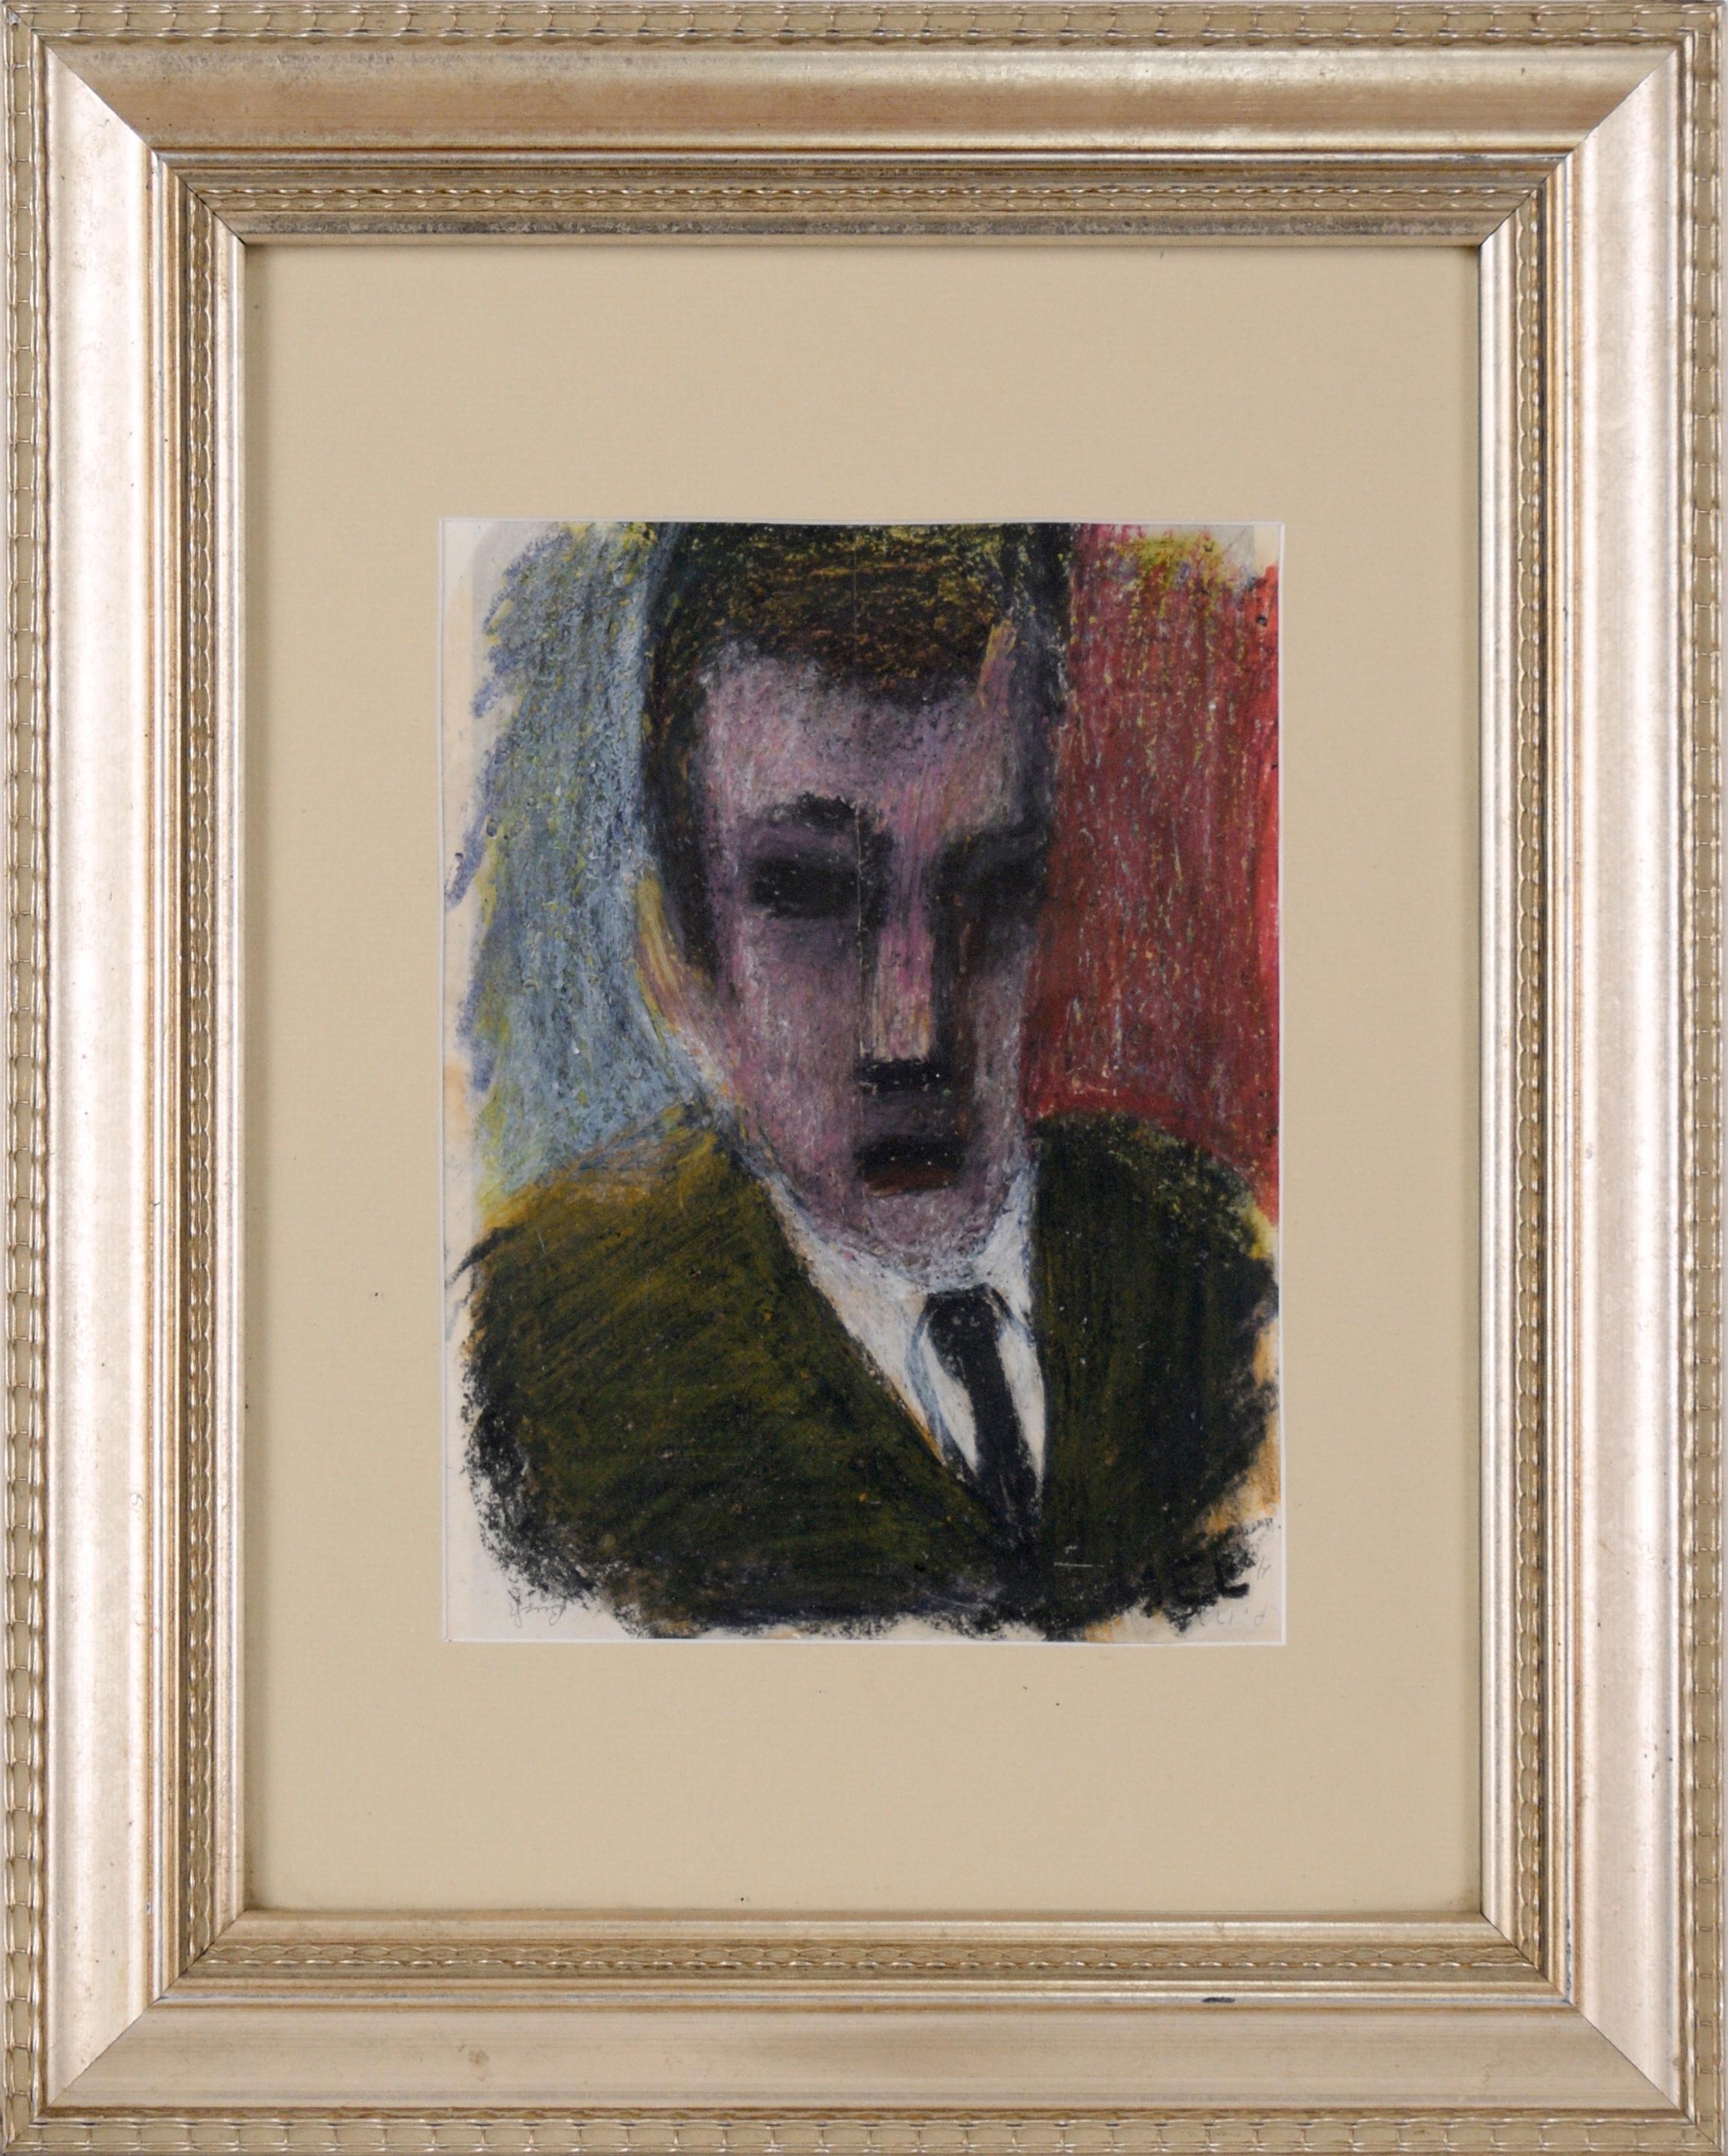 Unknown Figurative Art - Abstract Expressionist Portrait of a Man in a Suit in Pastel on Paper Bay Area